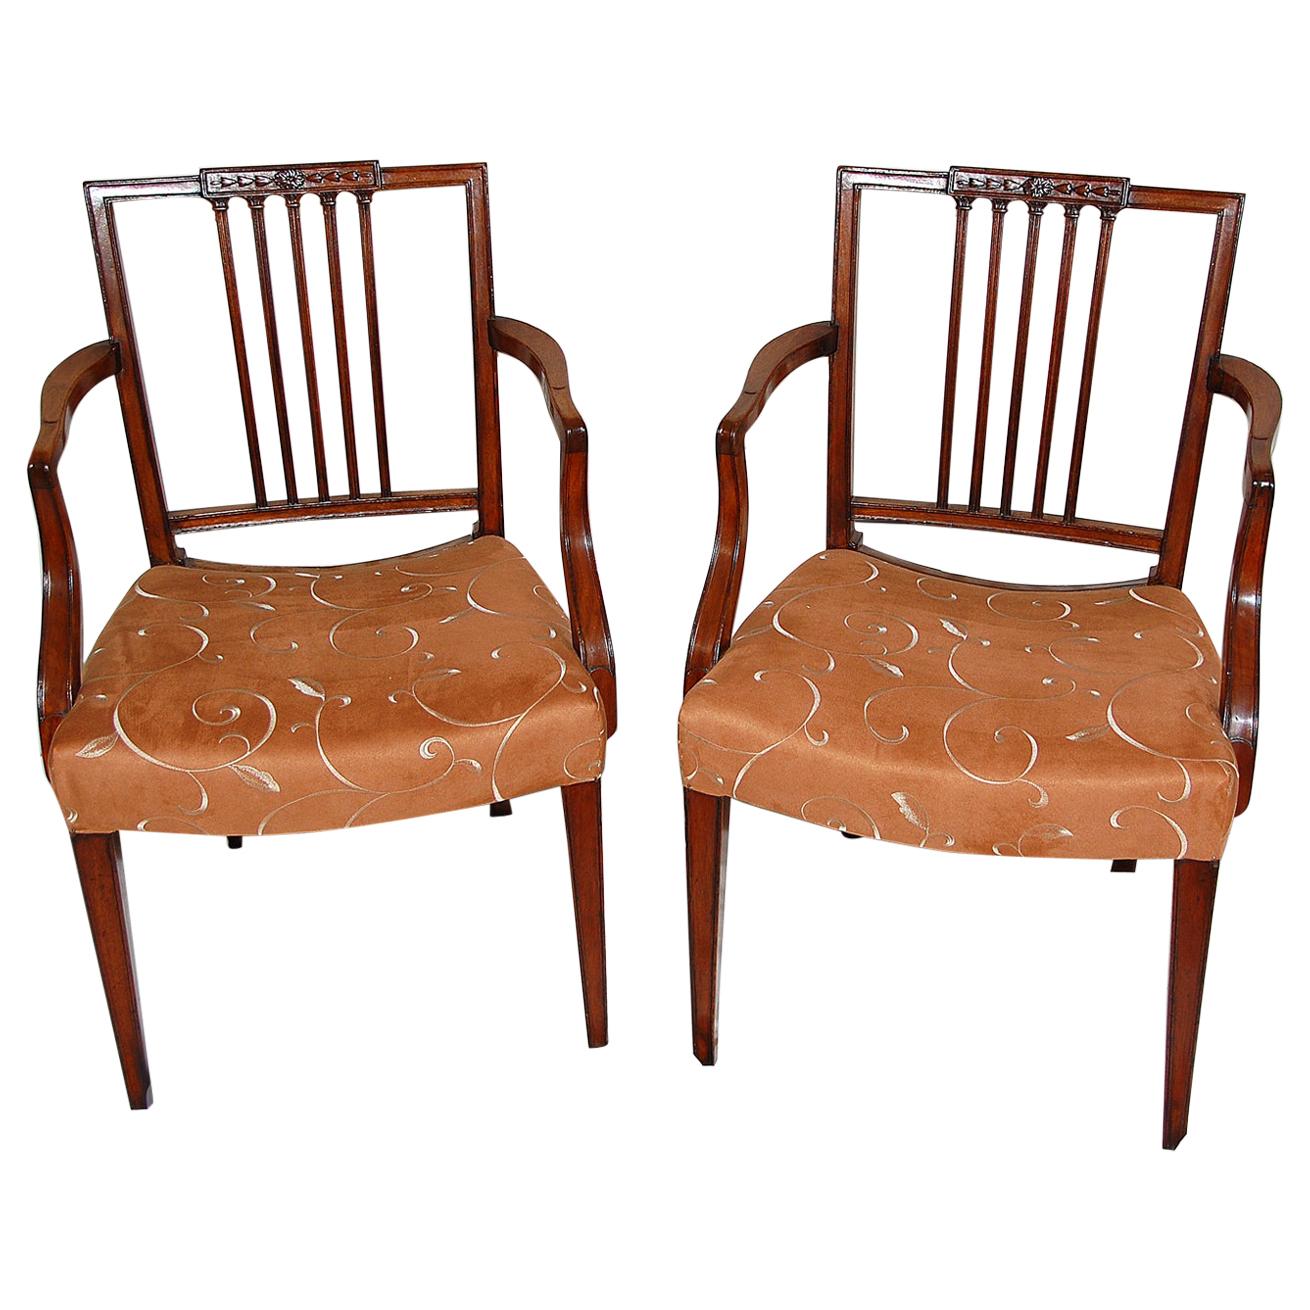 English Georgian Period Mahogany Sheraton Pair of Armchairs Square Carved Back